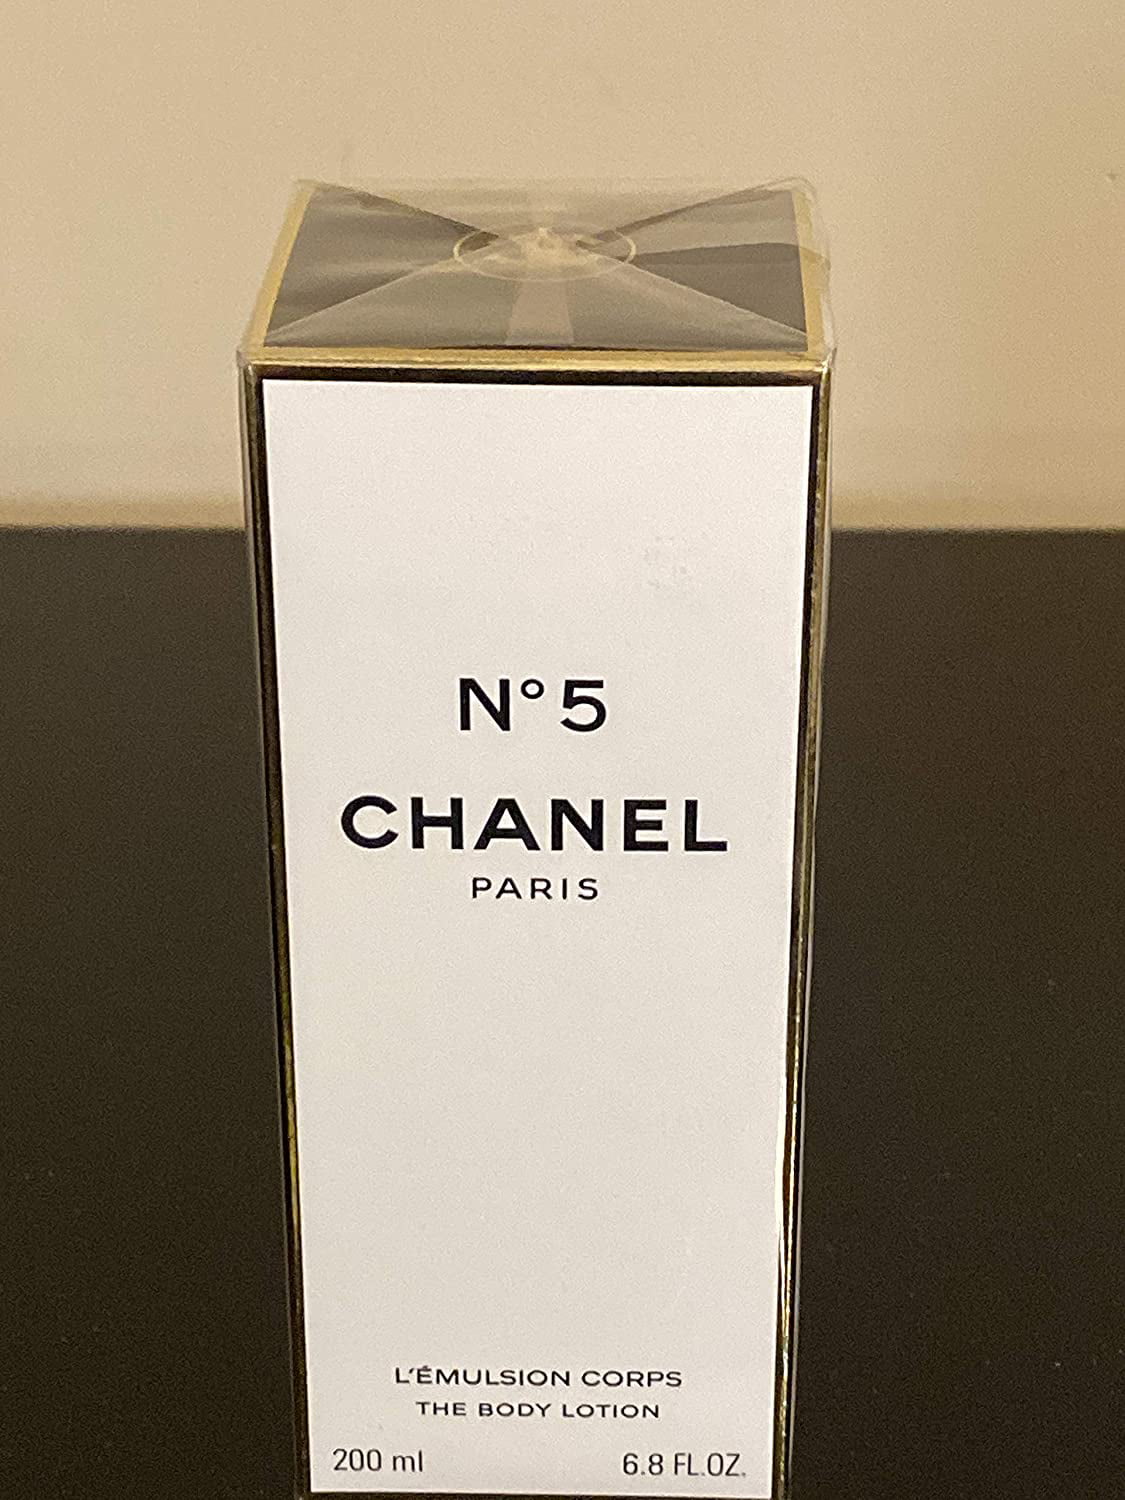 Chanel No. 5 by Chanel 6.8 ounce perfume Body Lotion for Women 